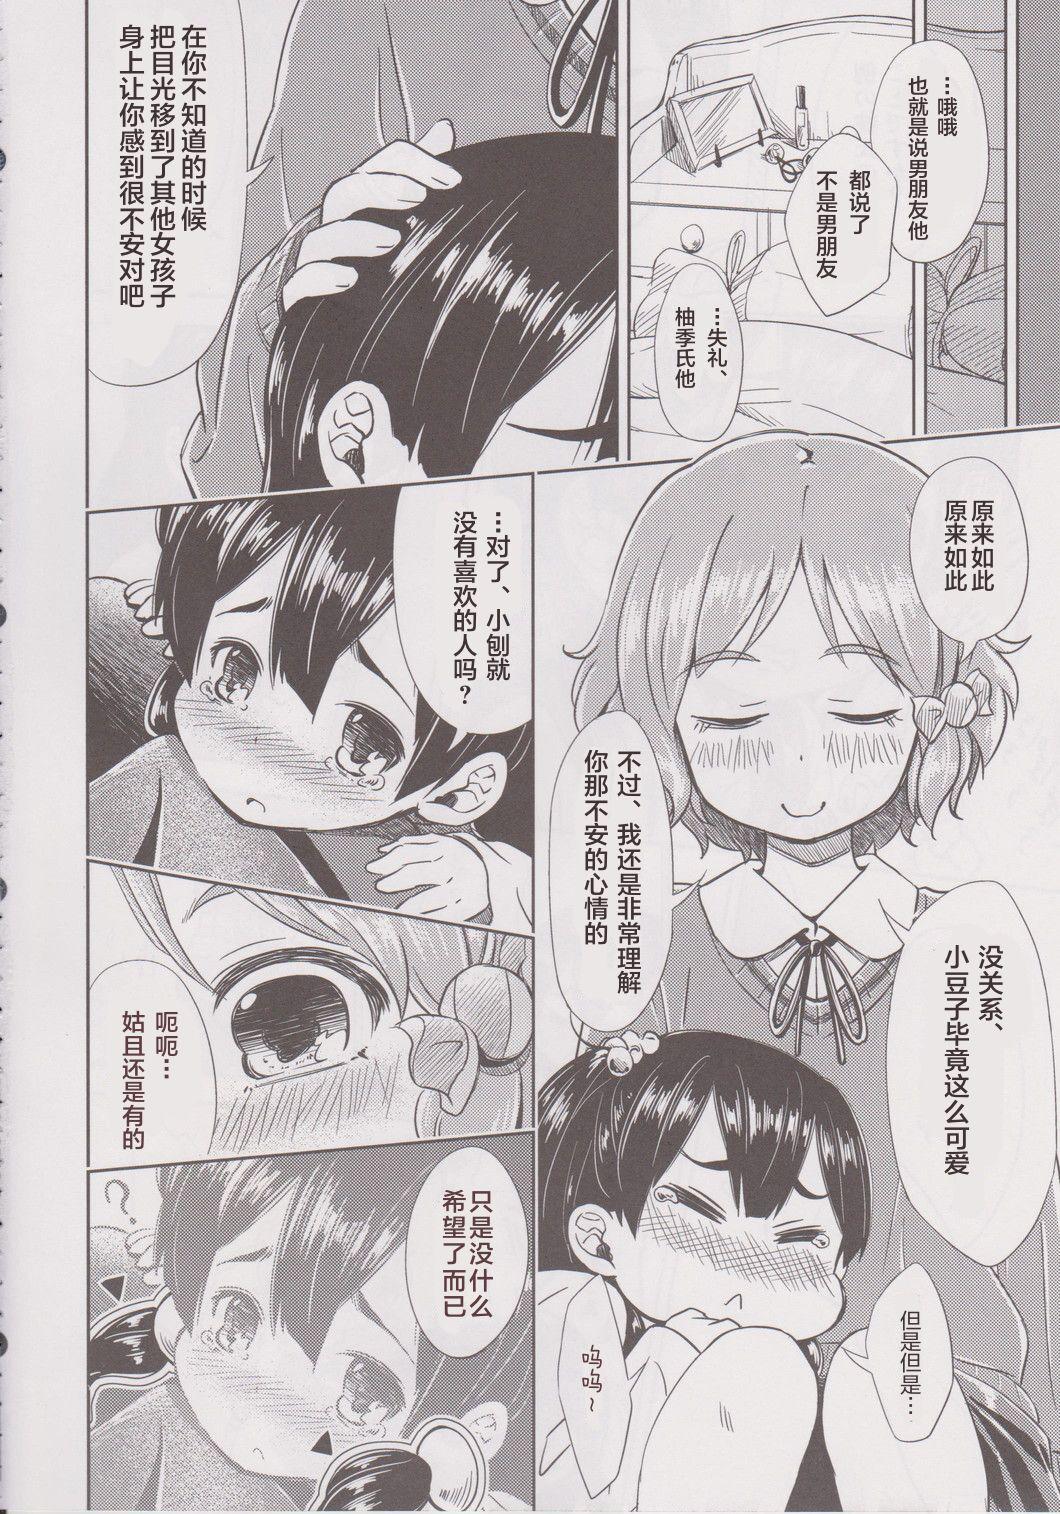 Asses Lovely Girls' Lily vol. 6 - Tamako market Relax - Page 7